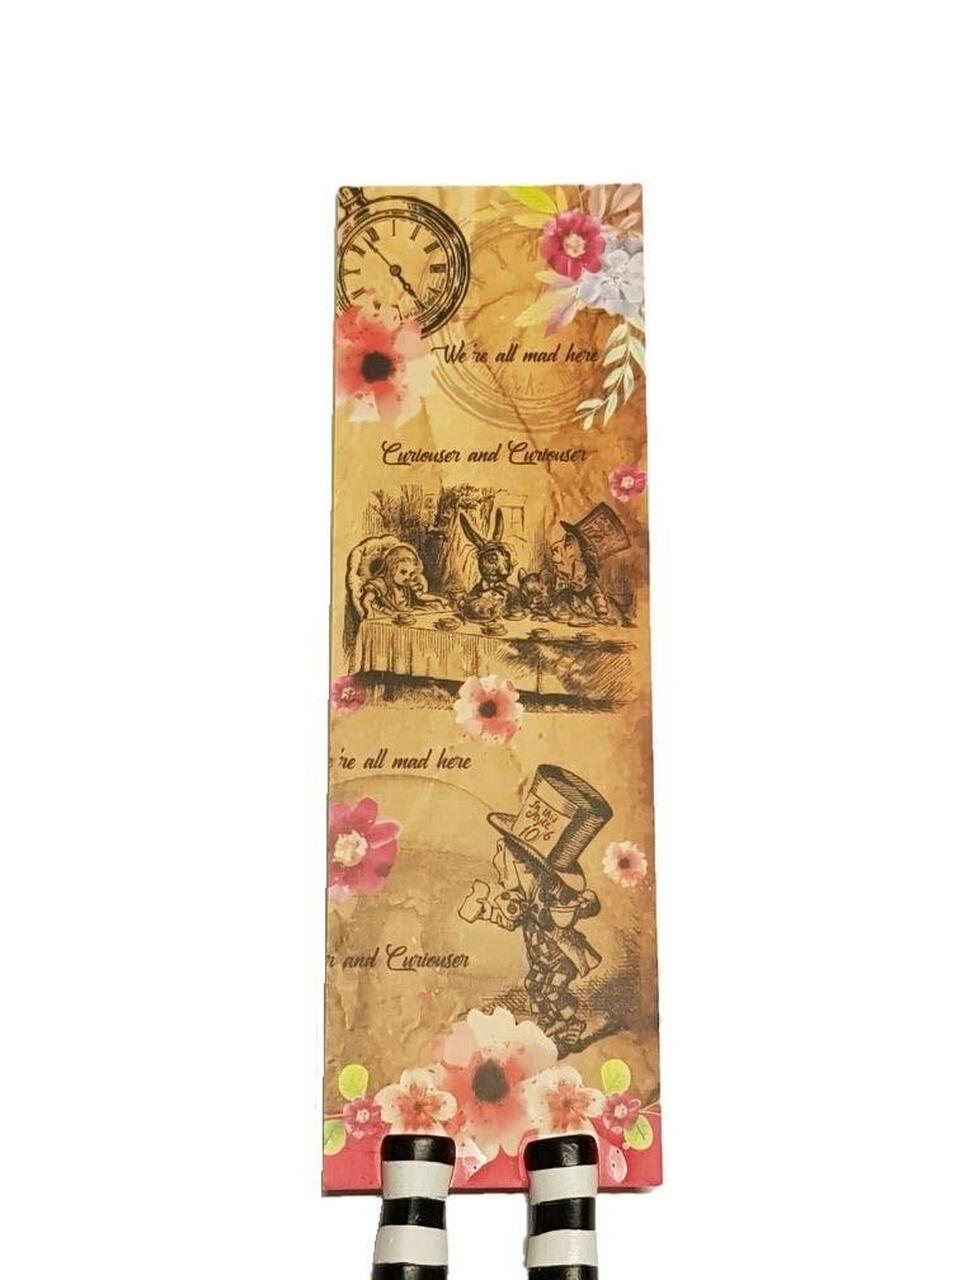 Alice in Wonderland Bookmark - Amazing Illustration and Moulded Alice feet - Book Lovers Gift